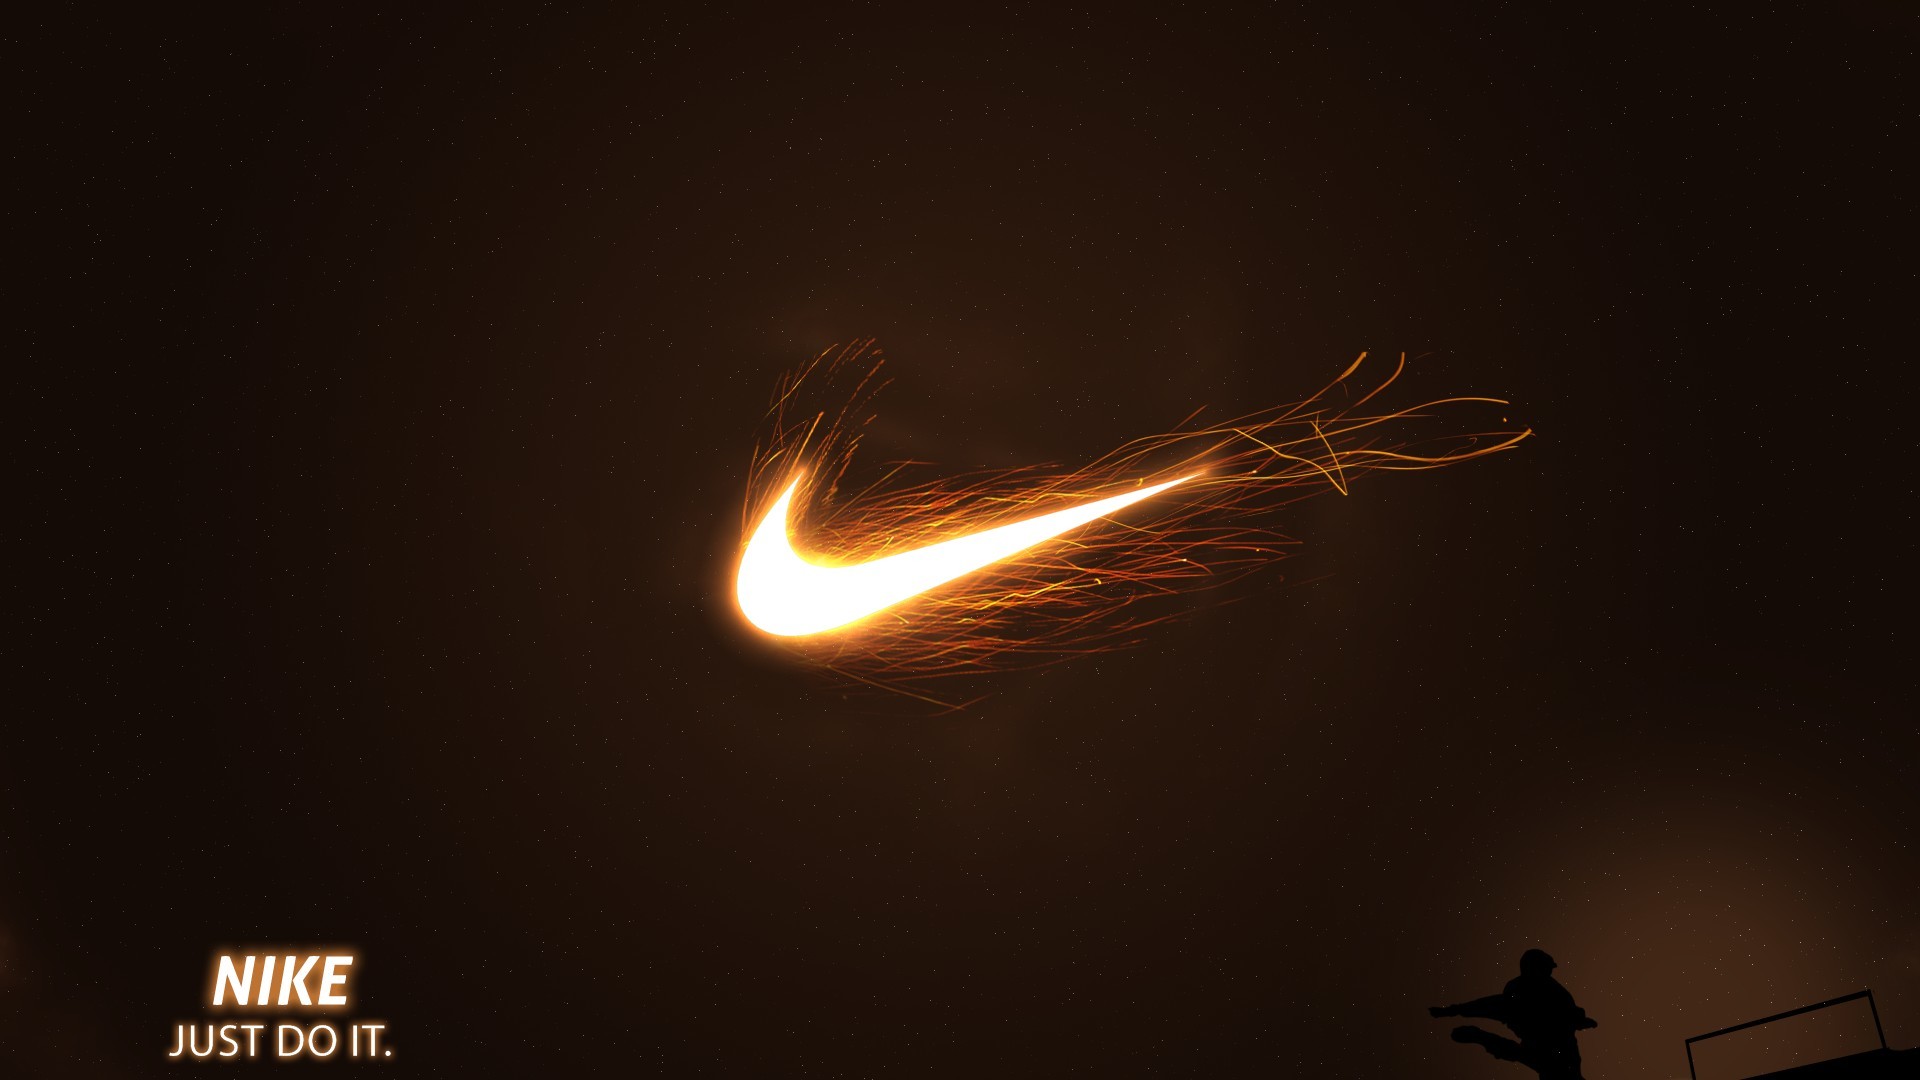 1920x1080 Nike Wallpapers Hd Nike Just Do It Wallpapers Hd